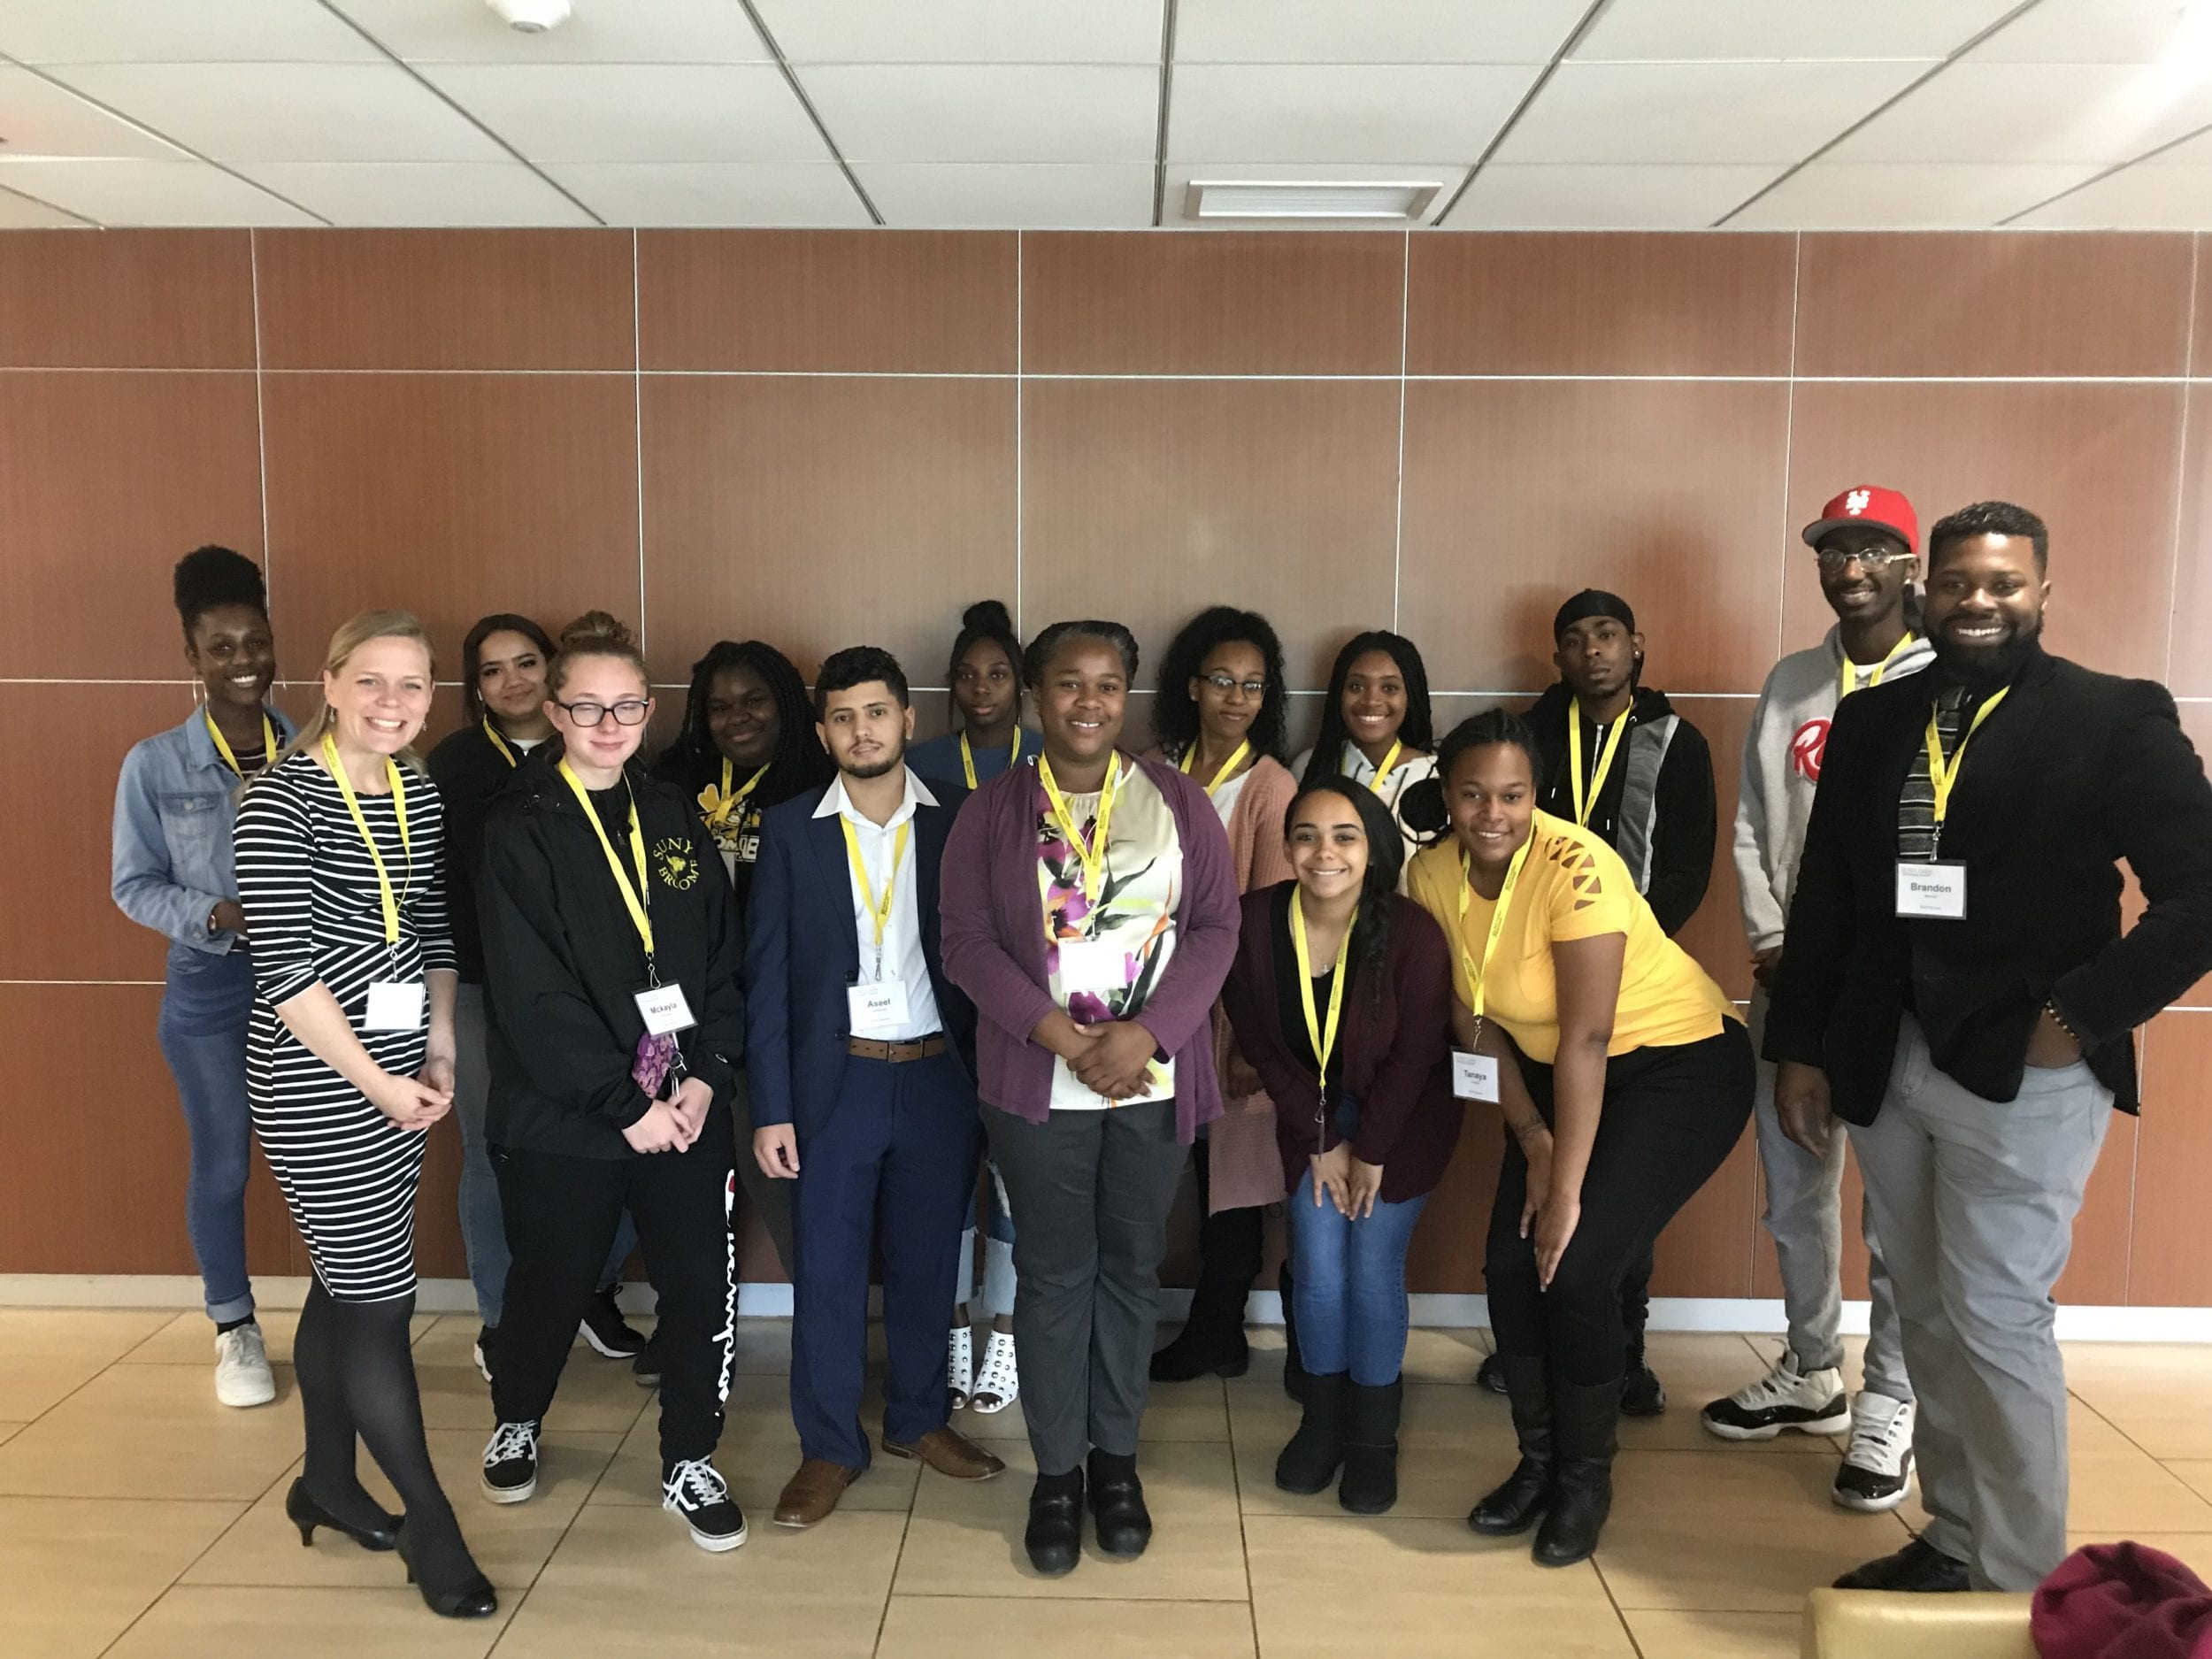 A group of 13 SUNY Broome students headed to SUNY Delhi on Oct. 4 to attend the 2019 Equity Summit.